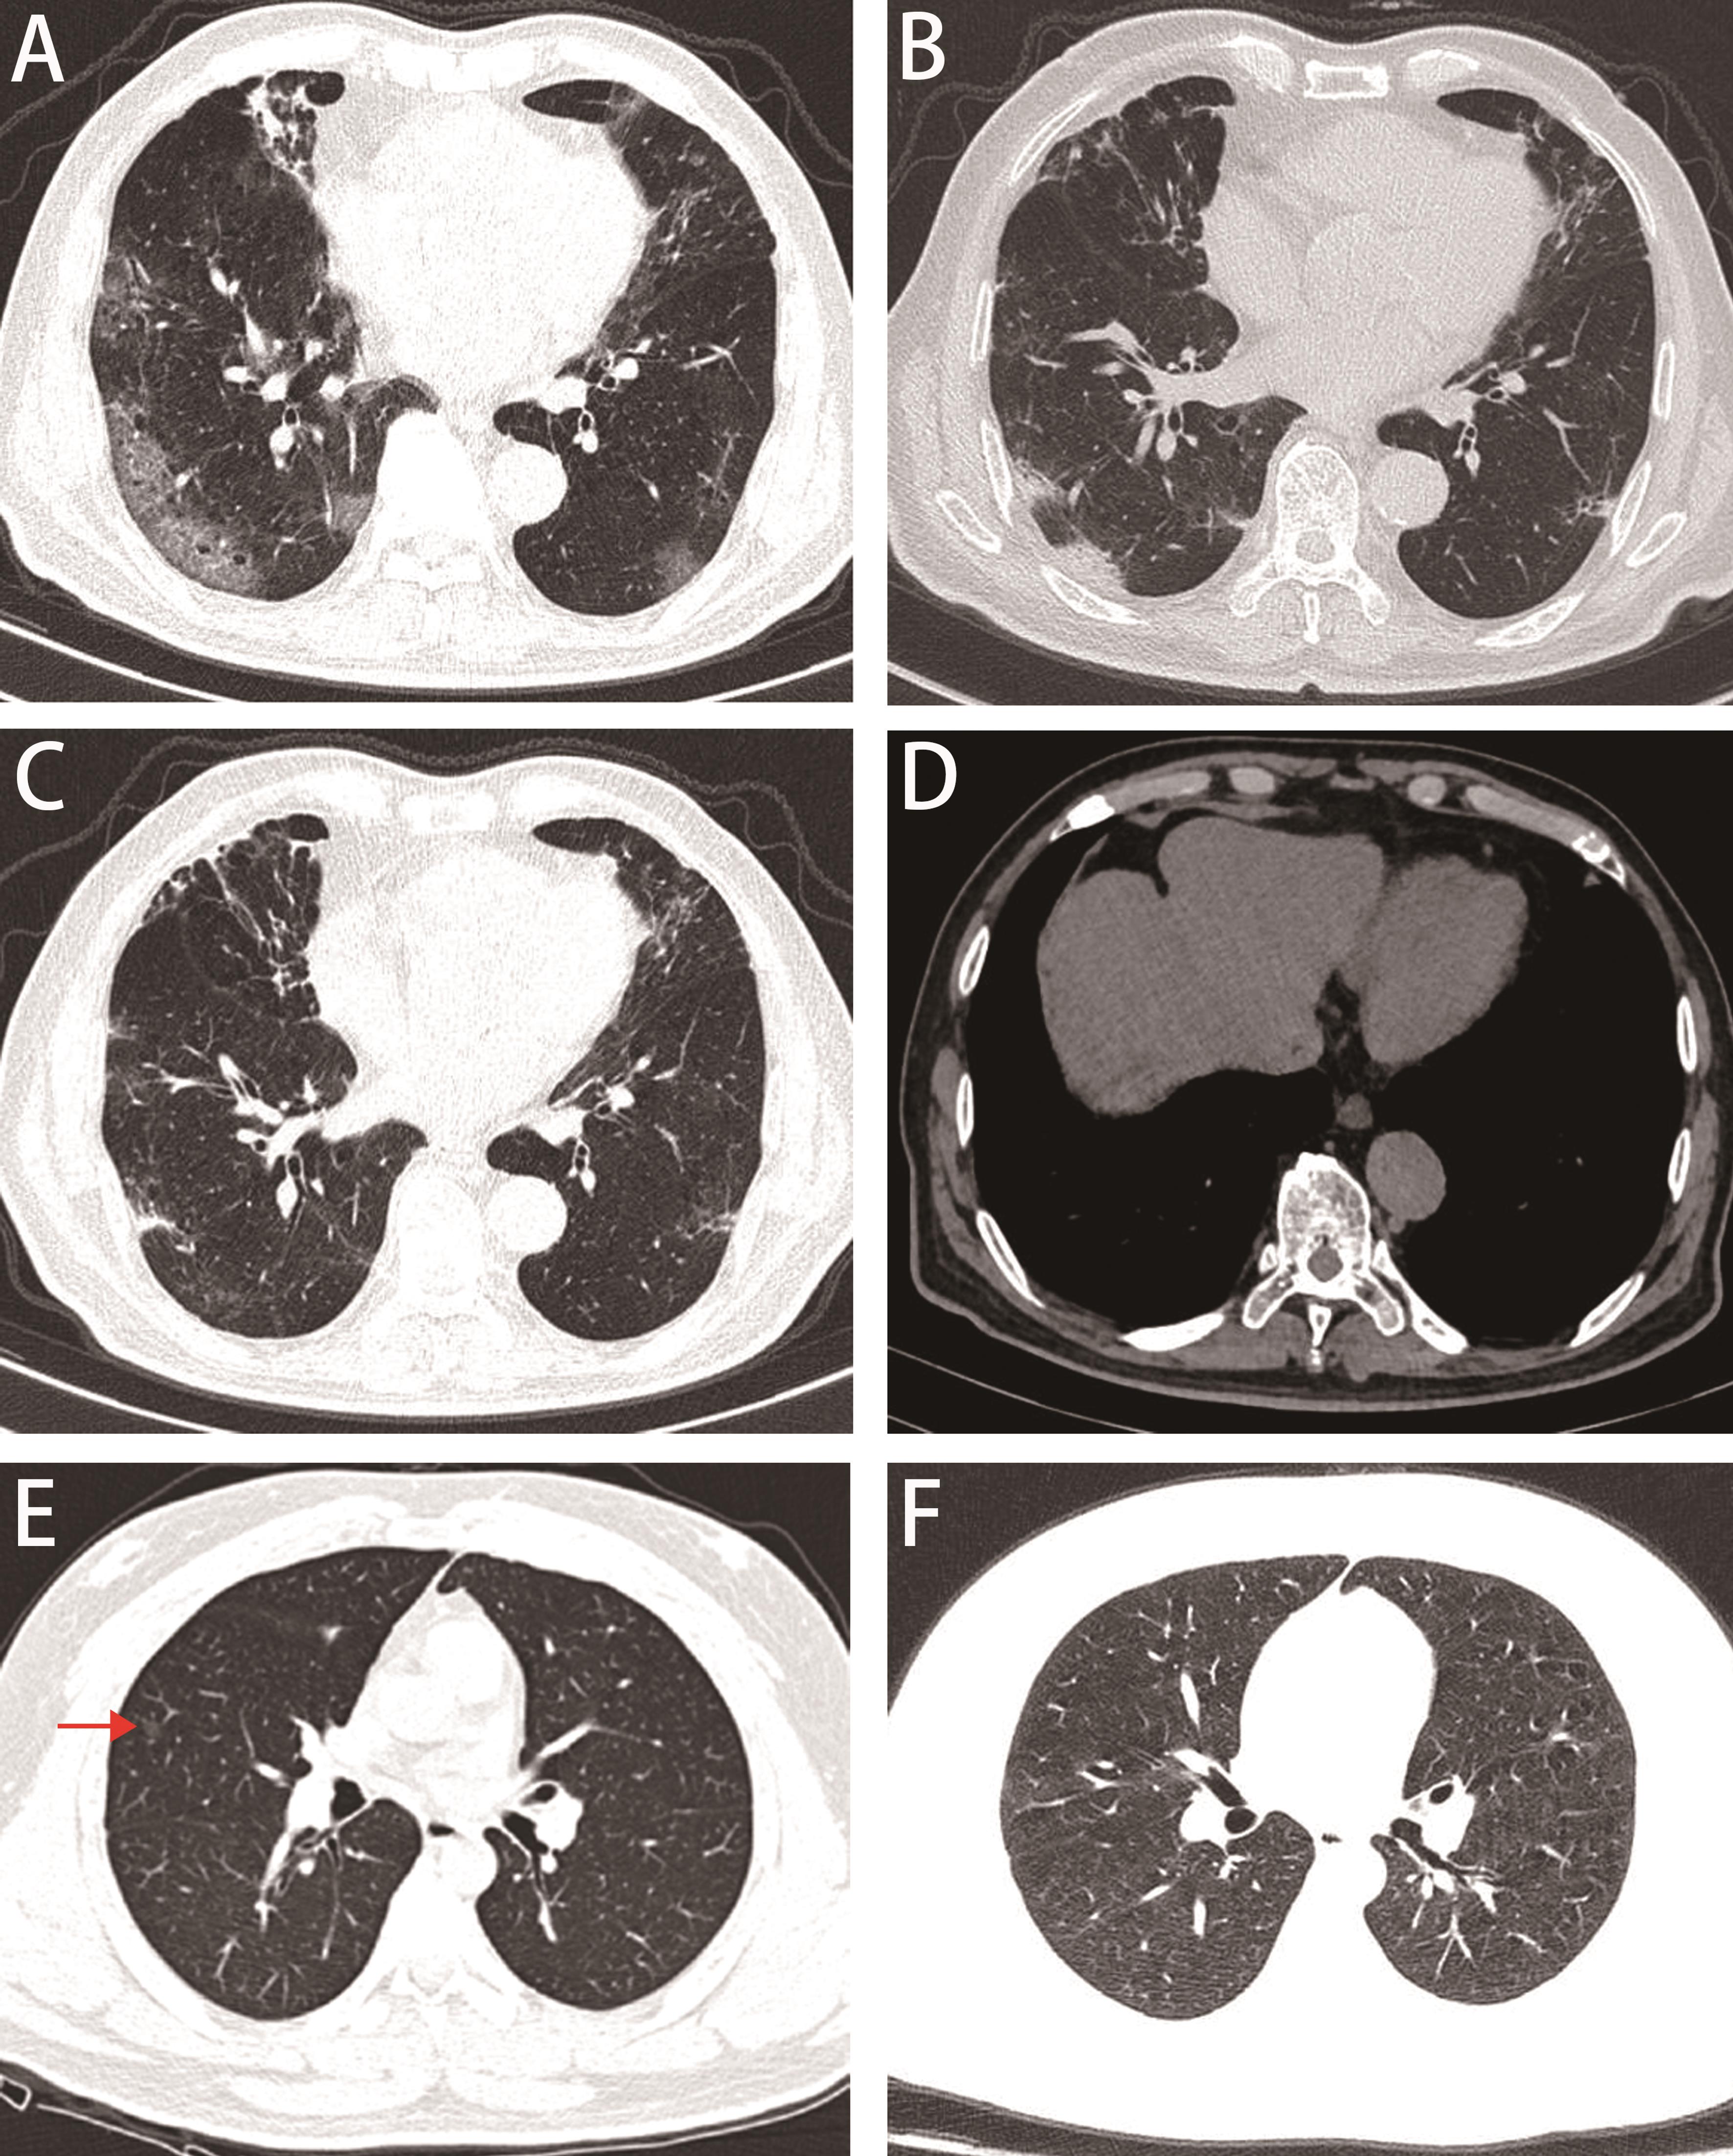 Lung and abdomen CT scans of case 1 and case 2.